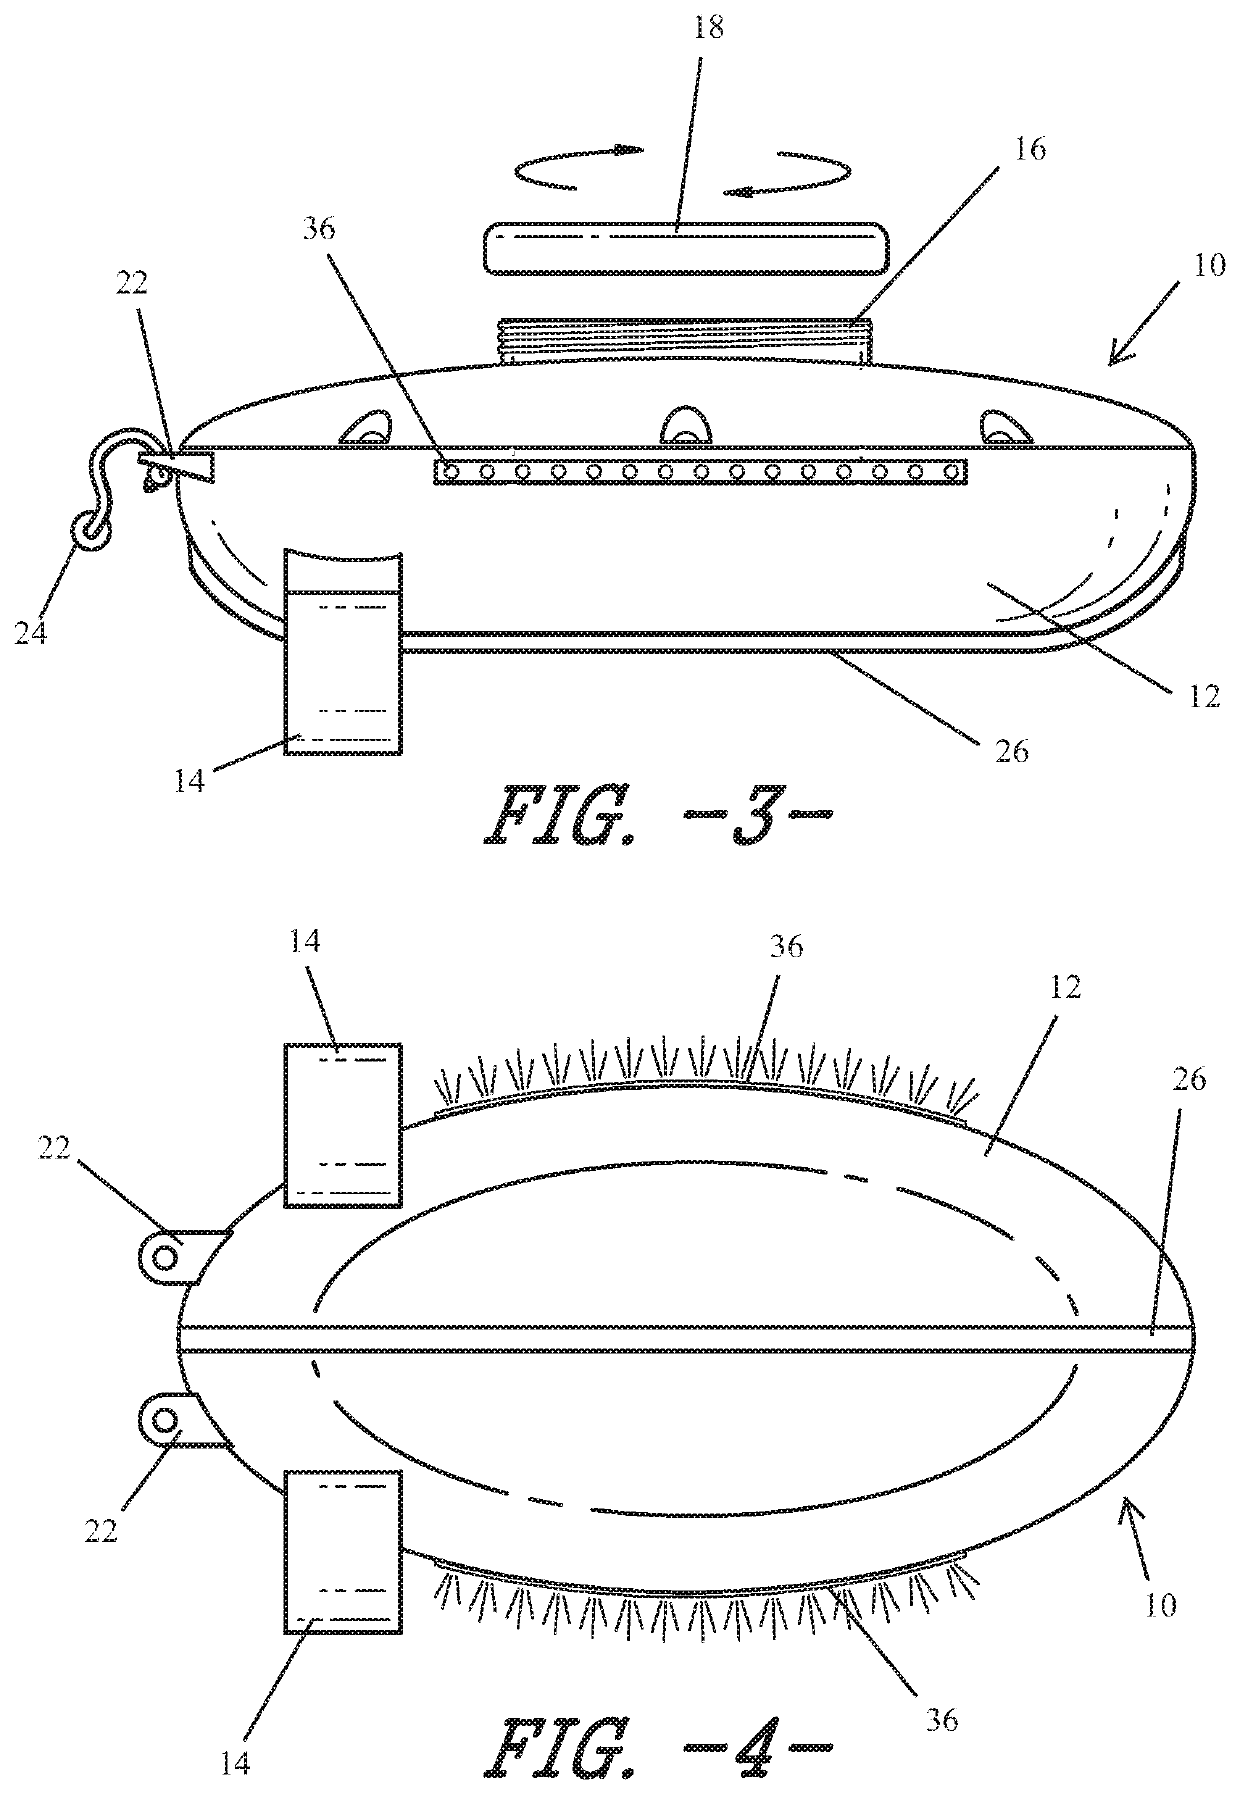 Remotely controlled floating cooler assembly and method